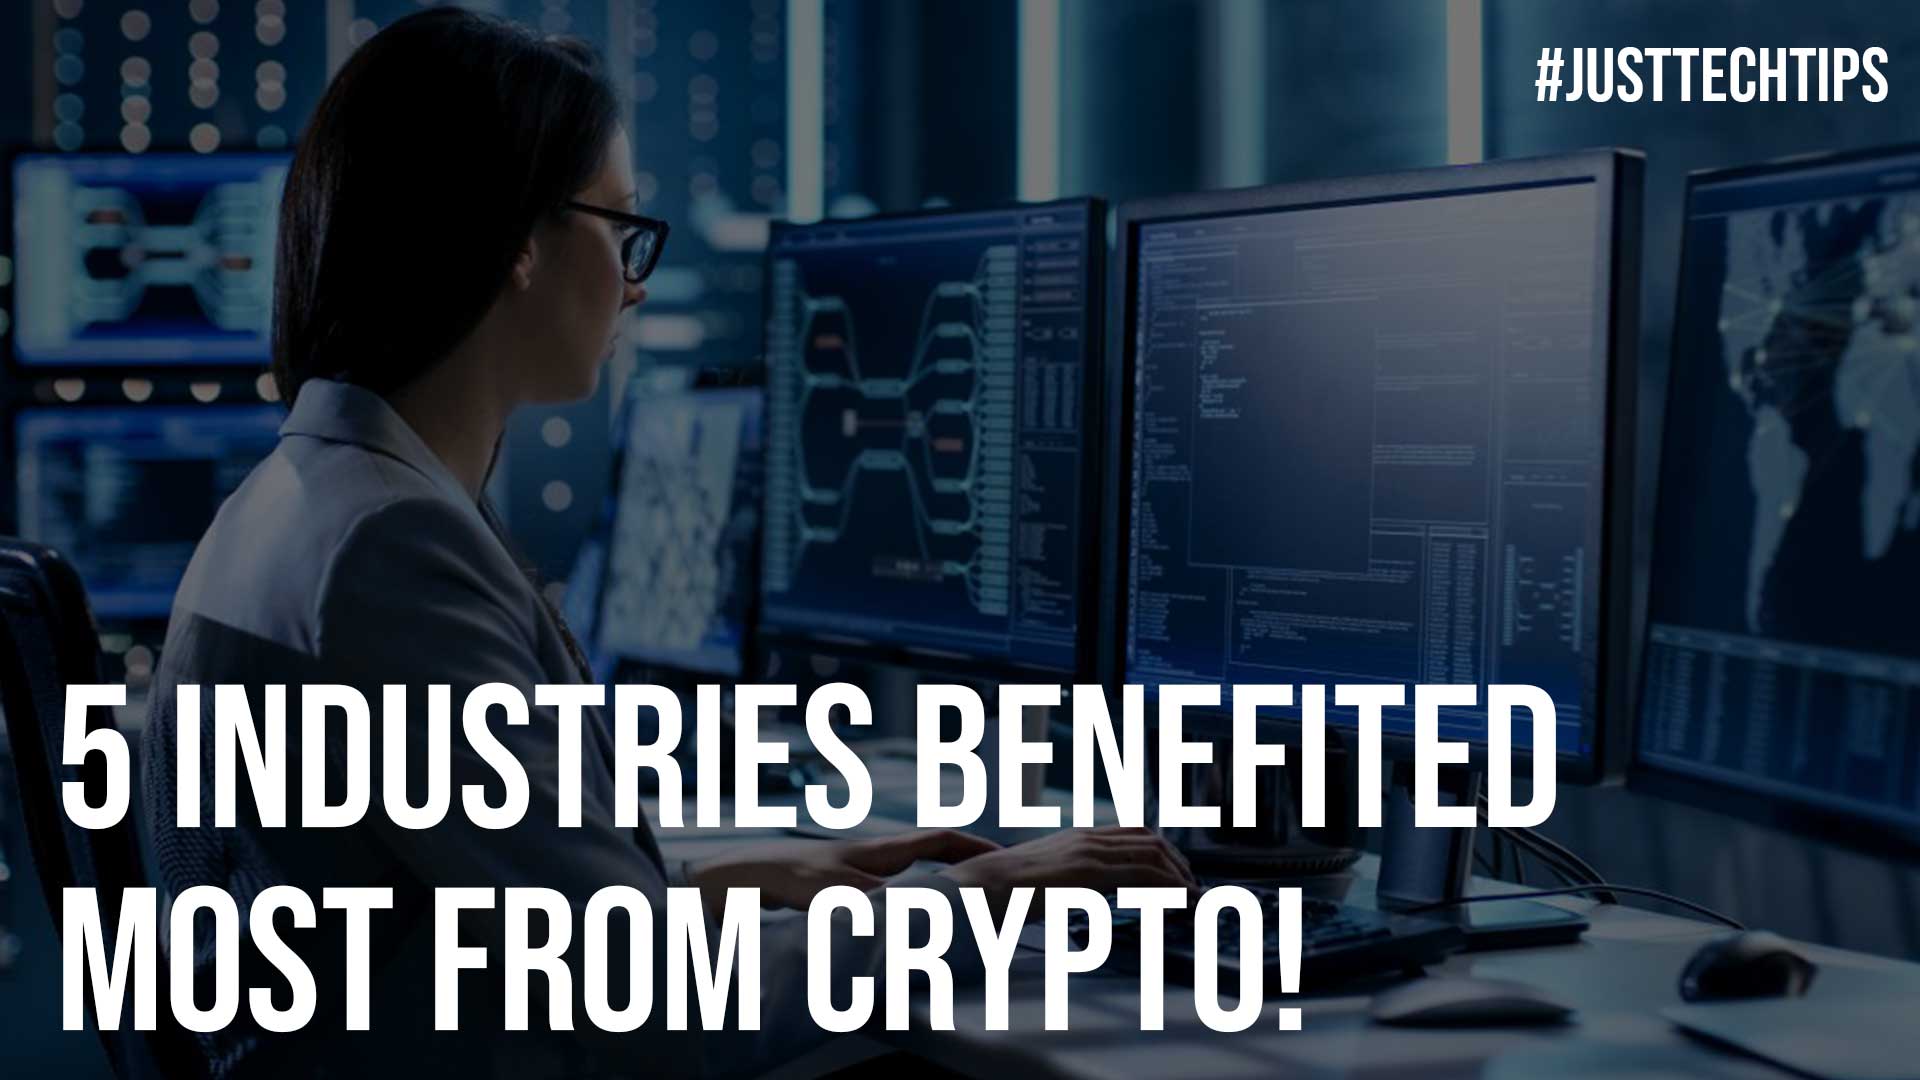 5 Industries Benefited Most from Crypto